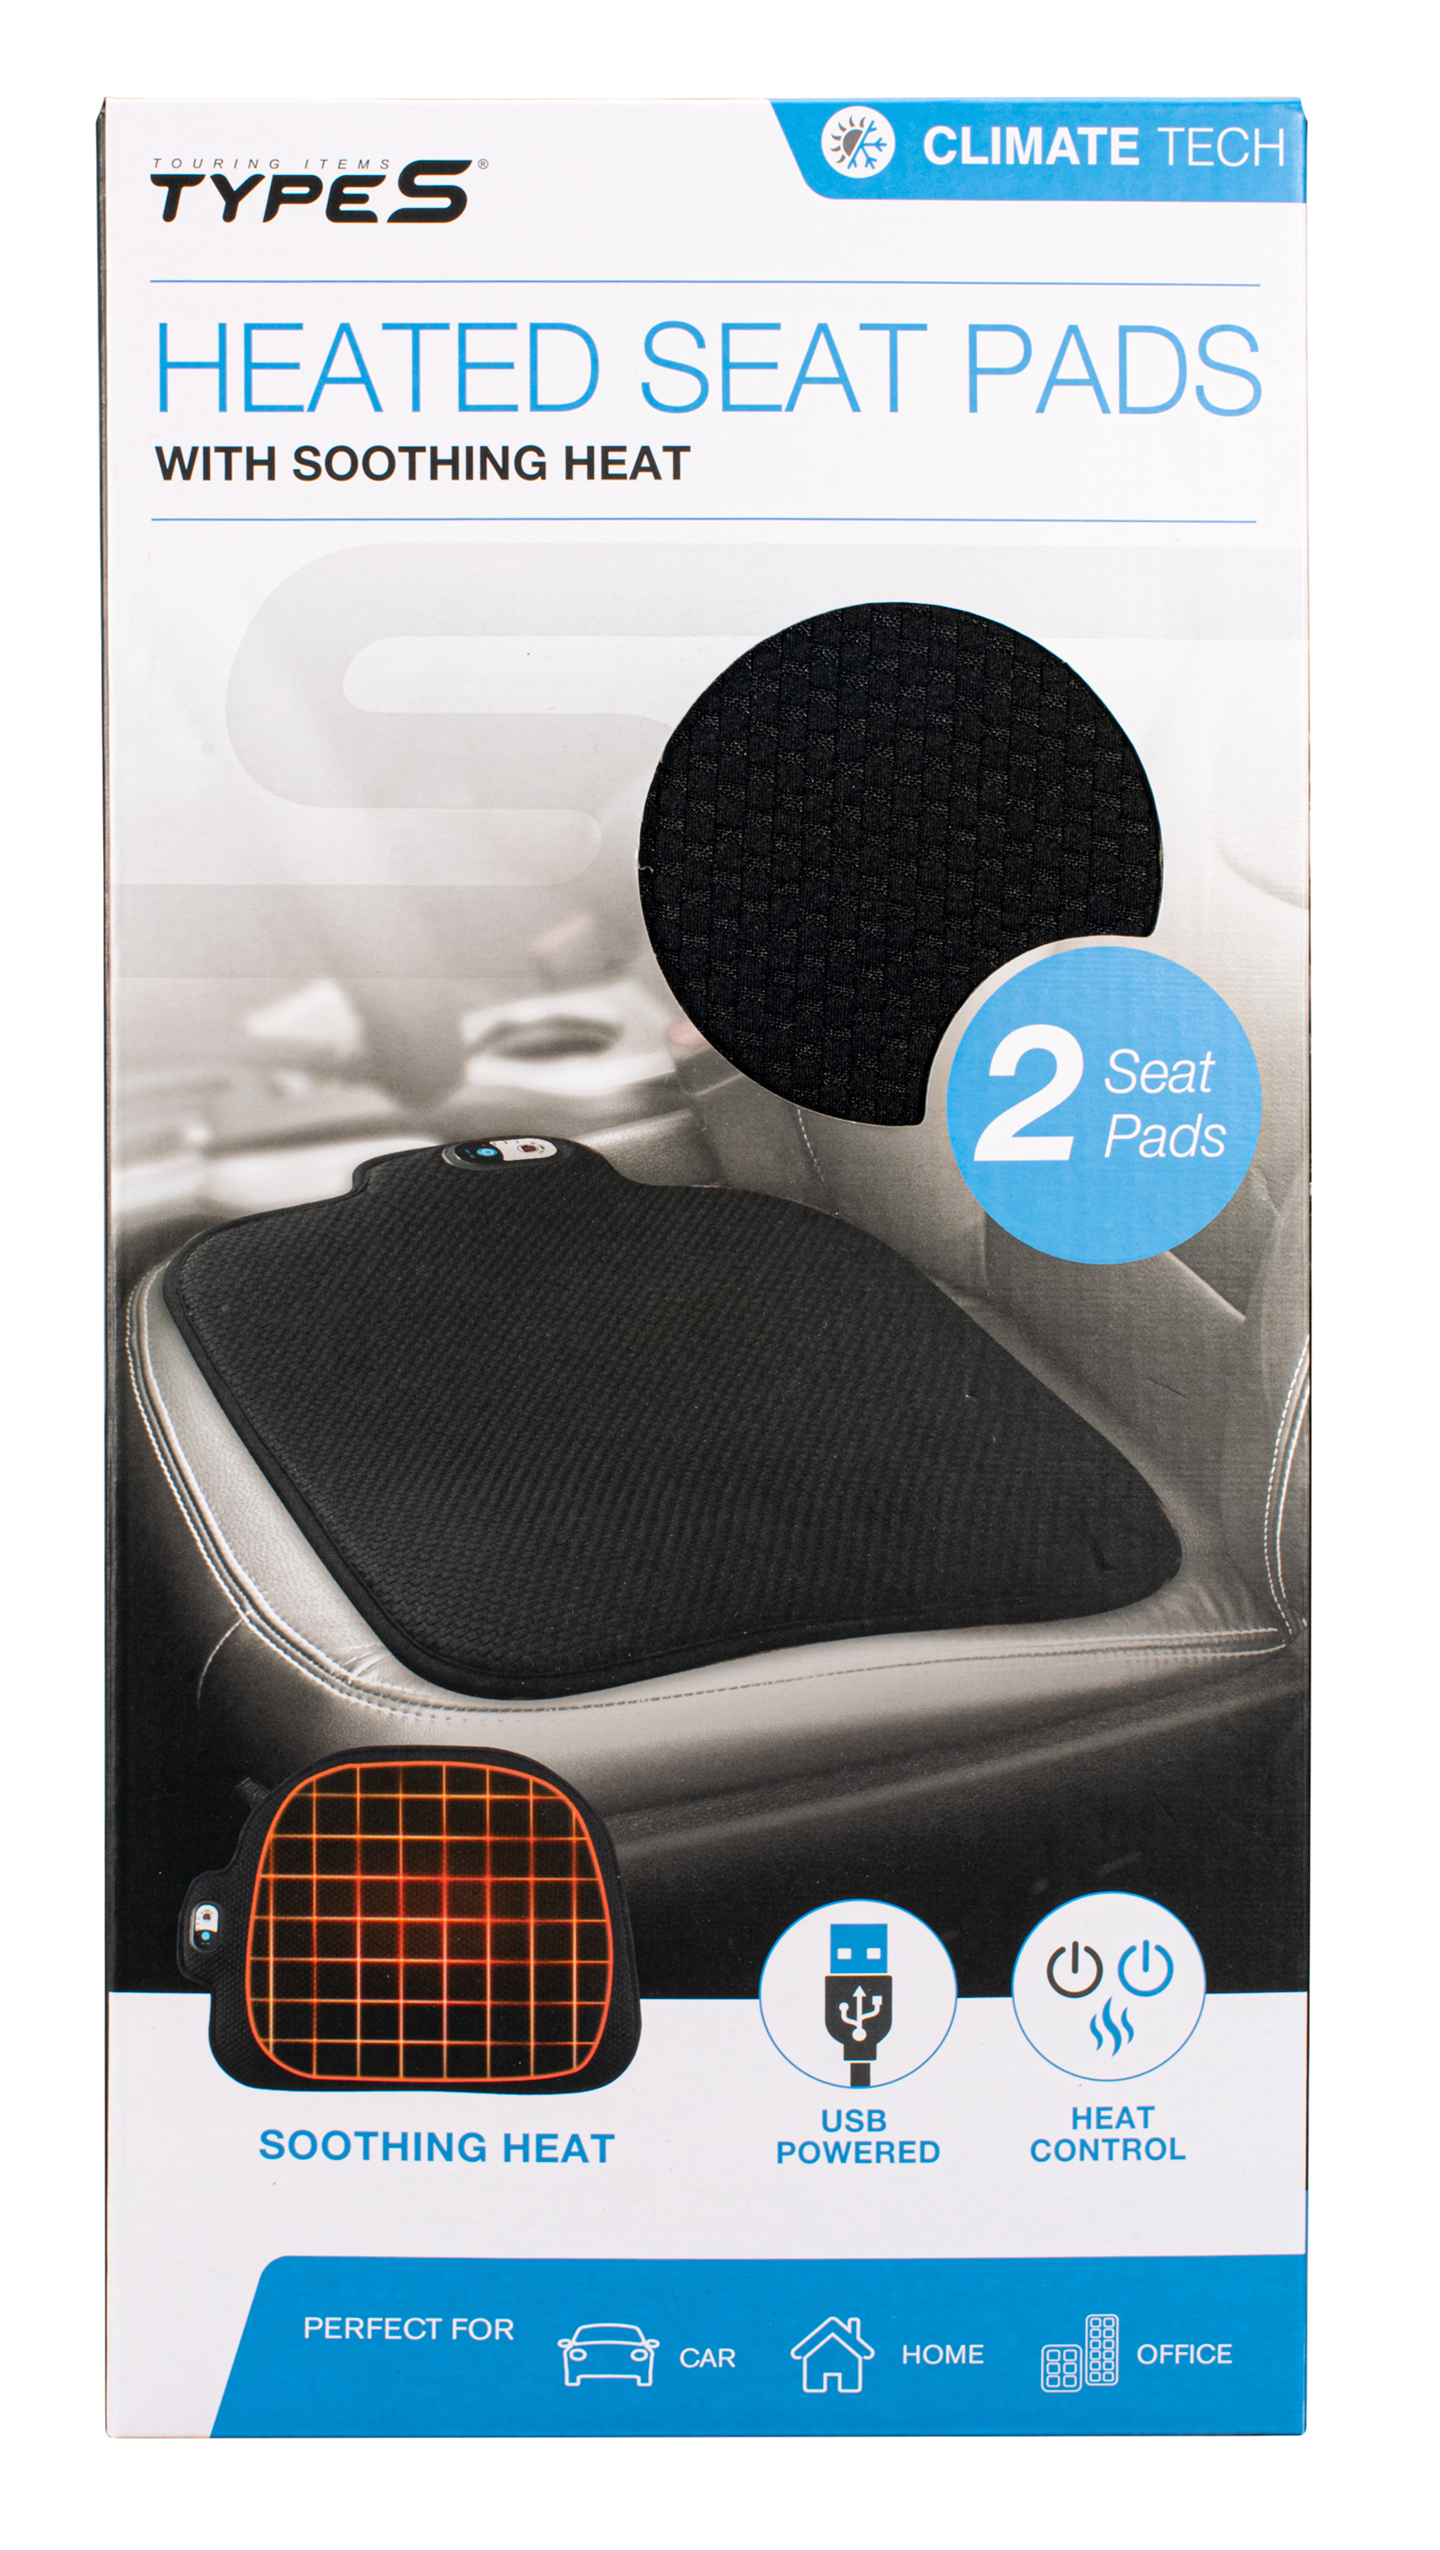 Type S Heated Seat Pad Universal Fit for All Vehicles, CU58216-4 - image 1 of 7